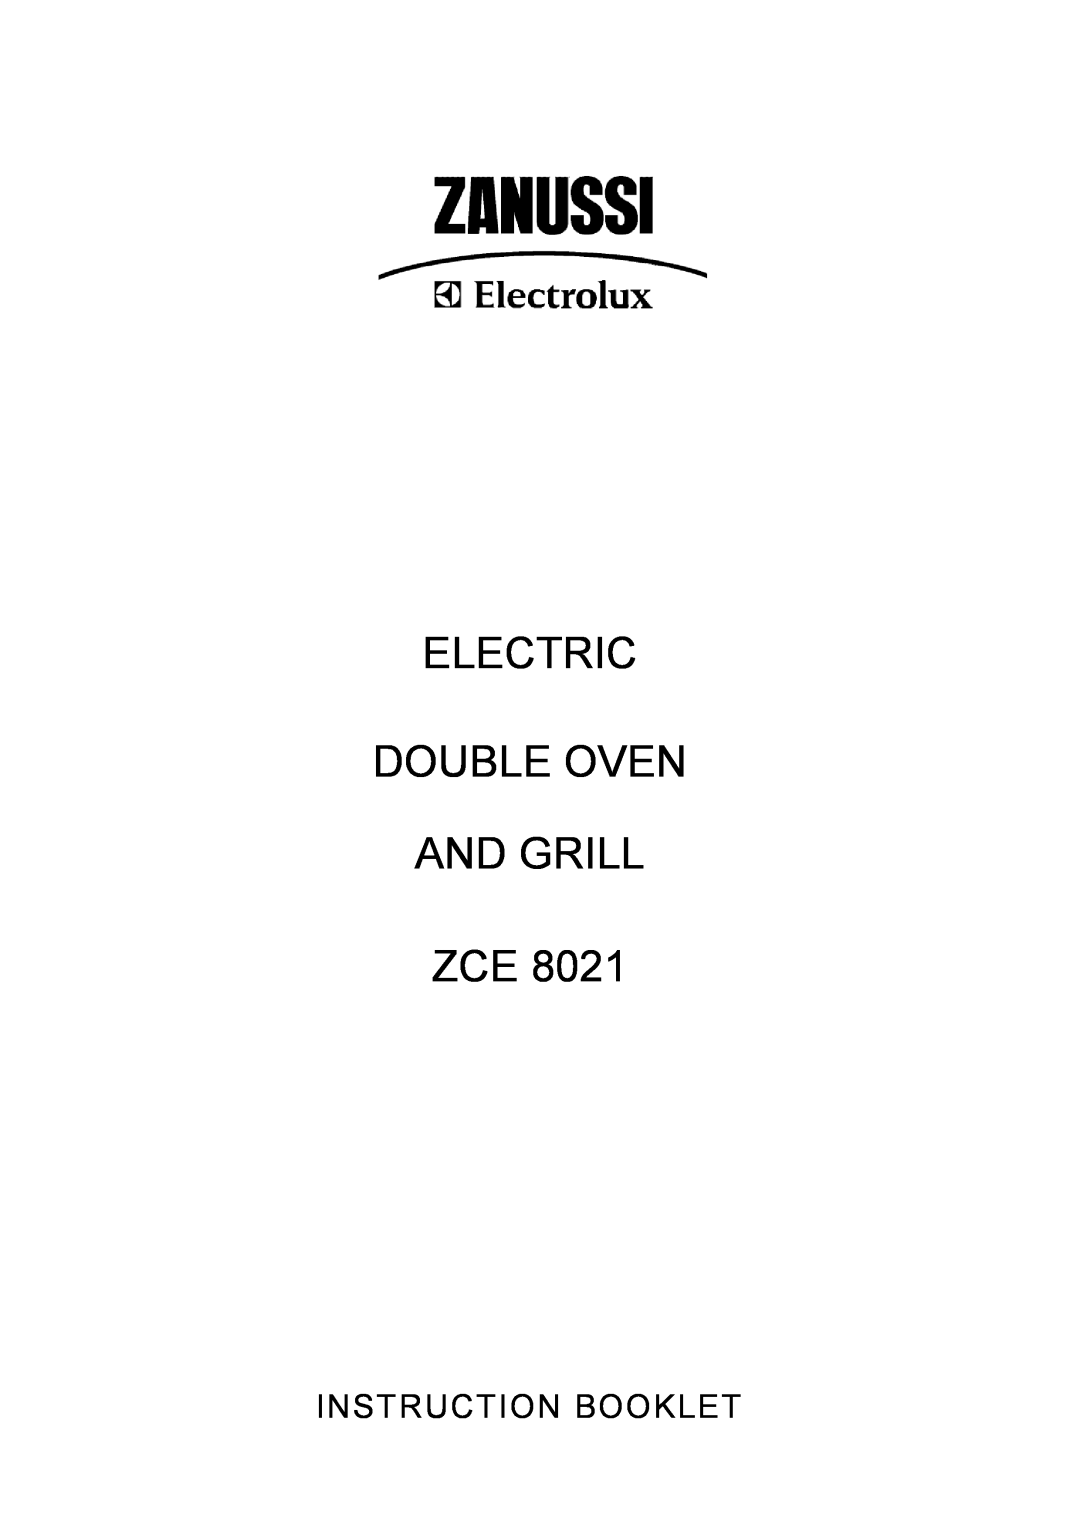 Zanussi ZCE 8021 manual Electric Double Oven And Grill Zce, Instruction Booklet 